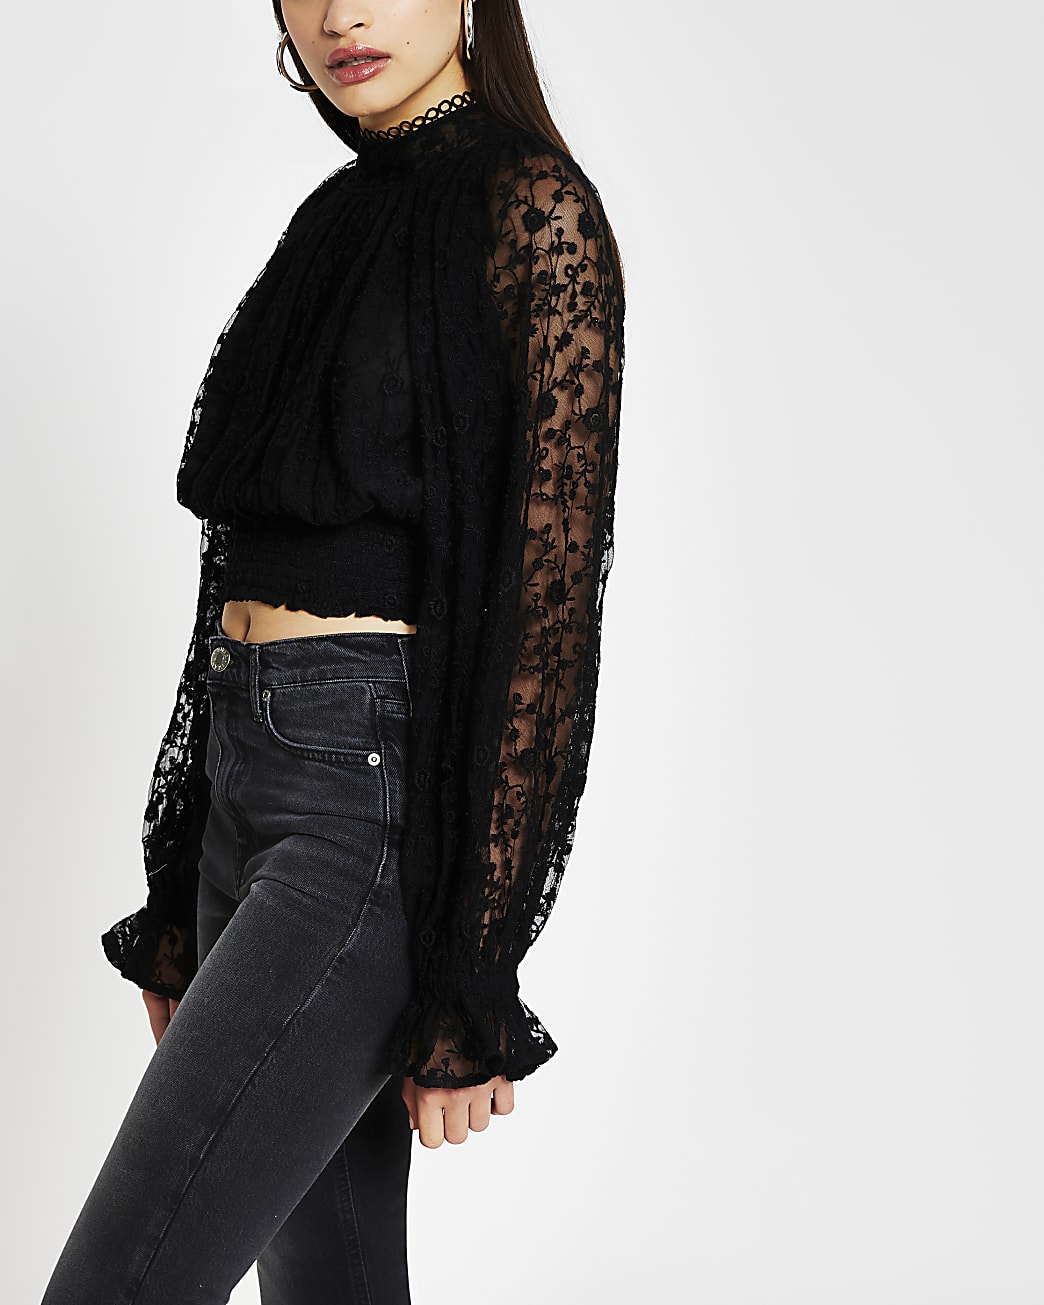 Black lace cropped top